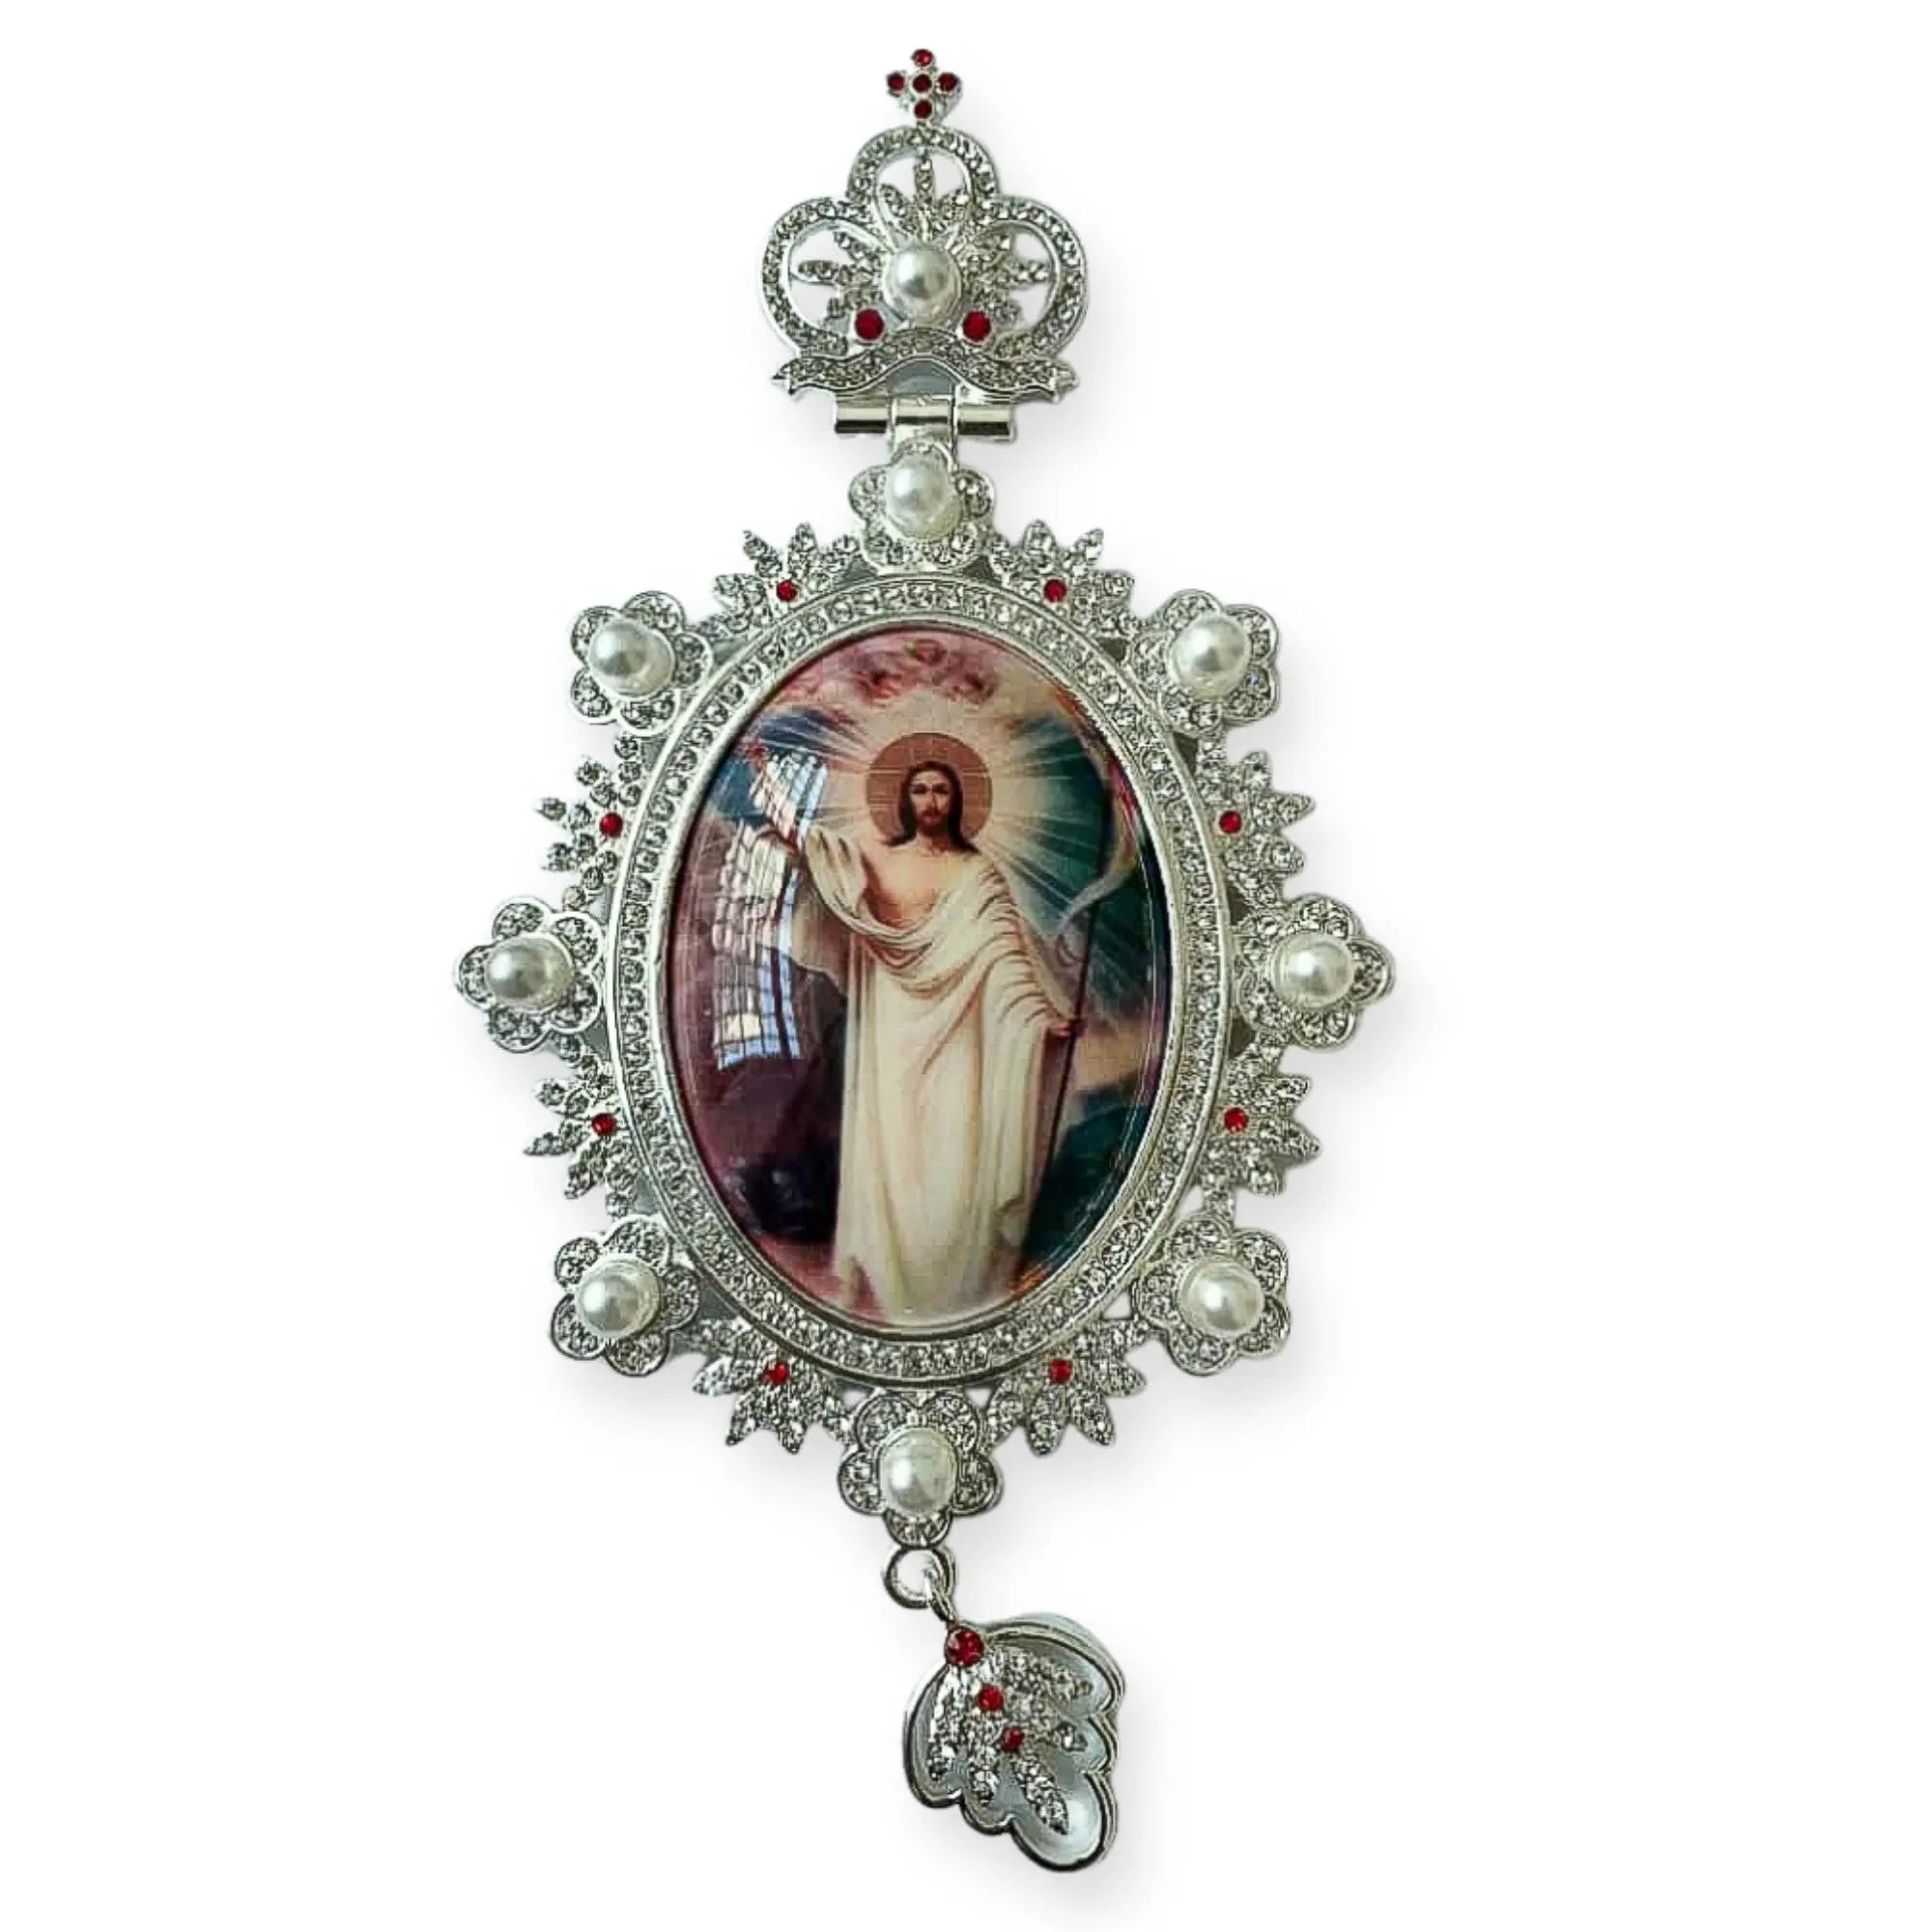 Pectoral Cross Resurrection of Jesus Silver Pendant White Pearl Crystallized Beads Relic Priest Bishop Clergy Chain Necklace 23" Nazareth Store